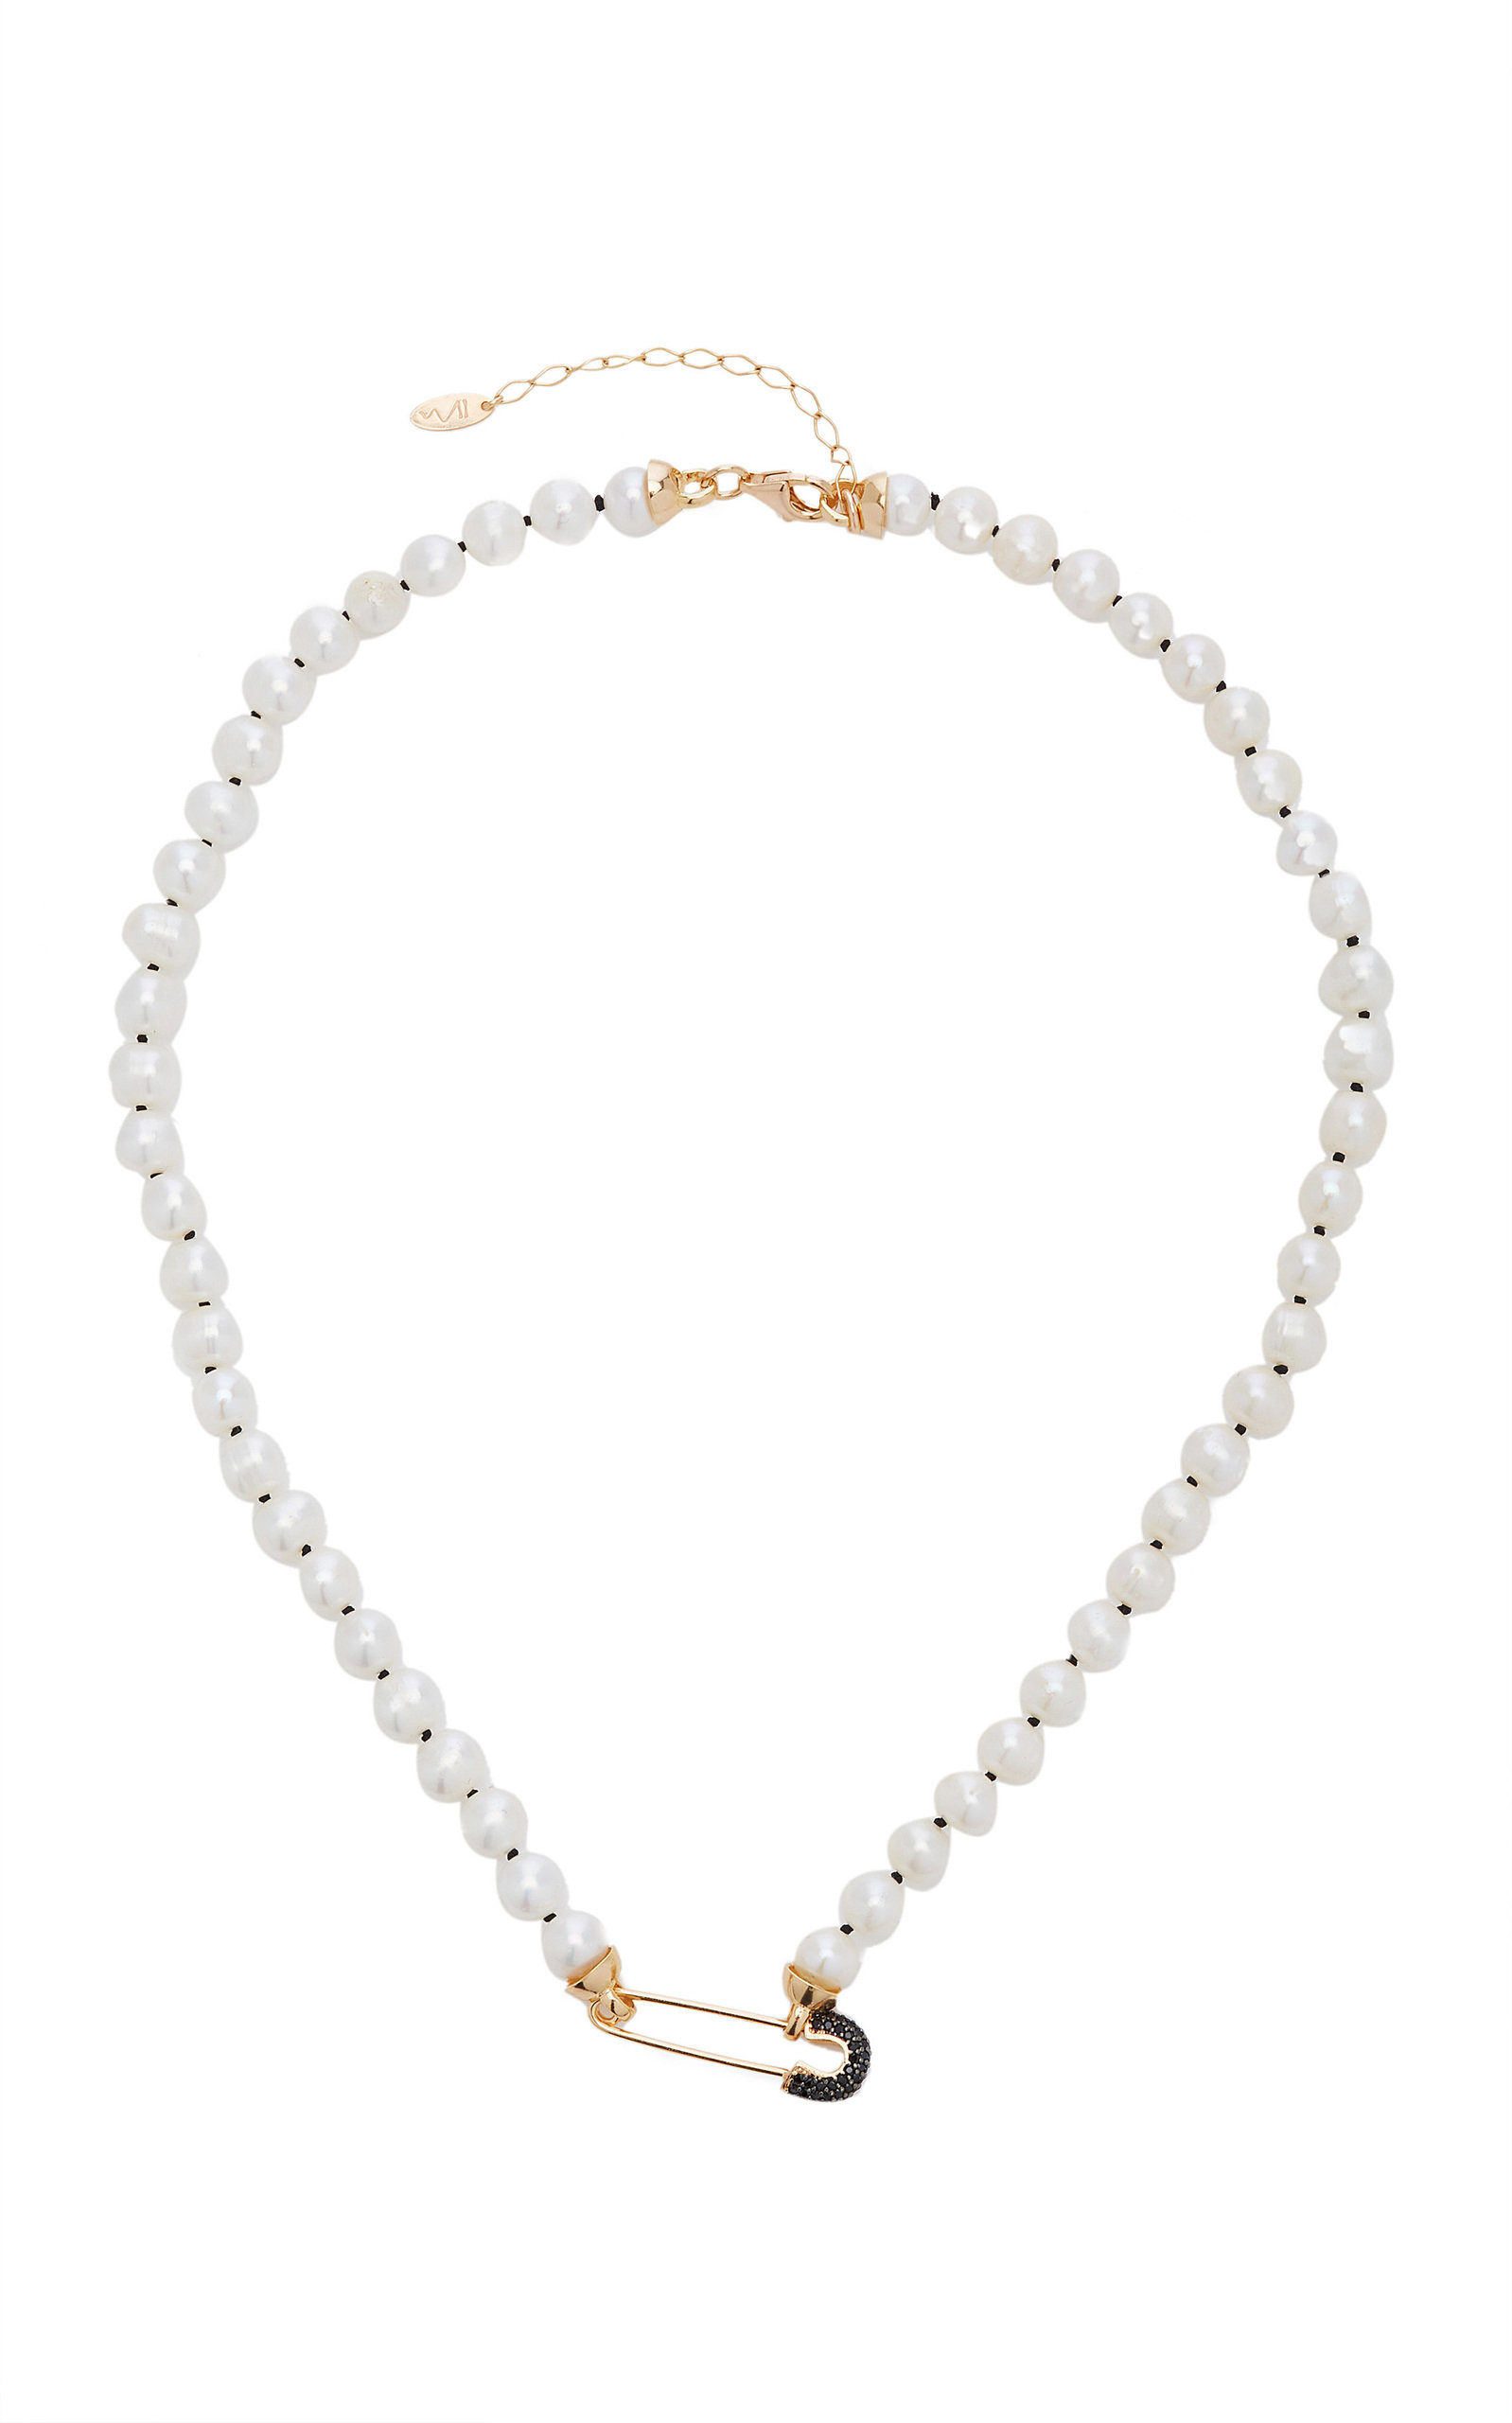 Maison Irem Women's Goldy Jazz Pearl 18K Gold-Plated Necklace